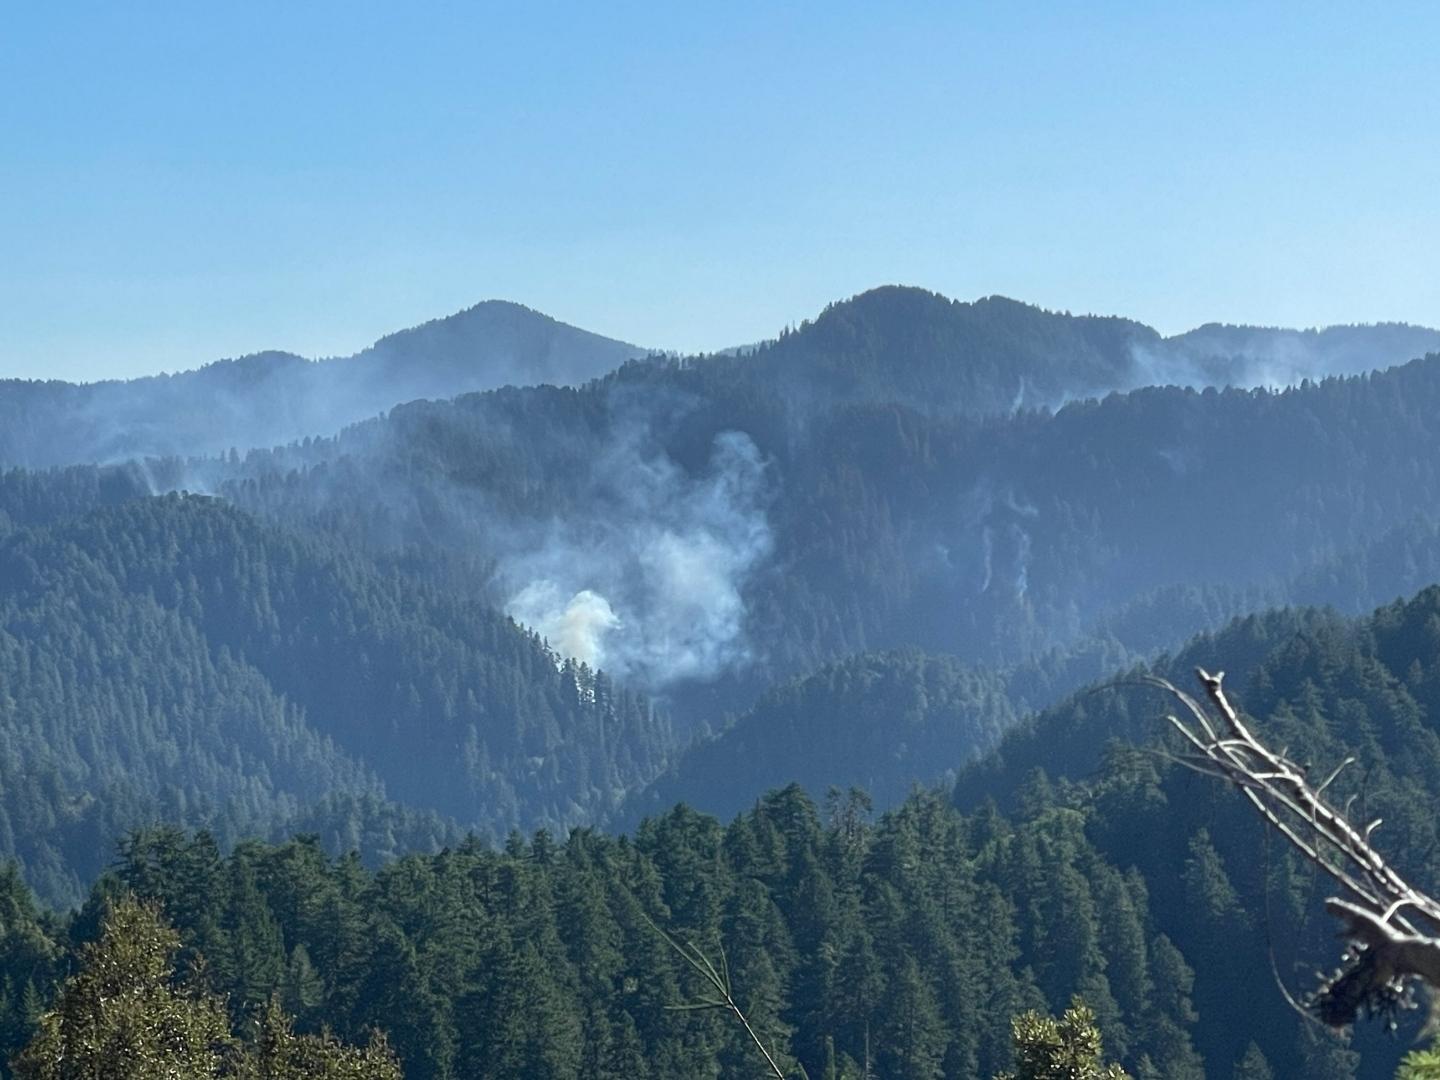 A photo of mountains with visible smoke from a fire burning in the center. The mountains are covered in pine trees. The sky is clear and blue.